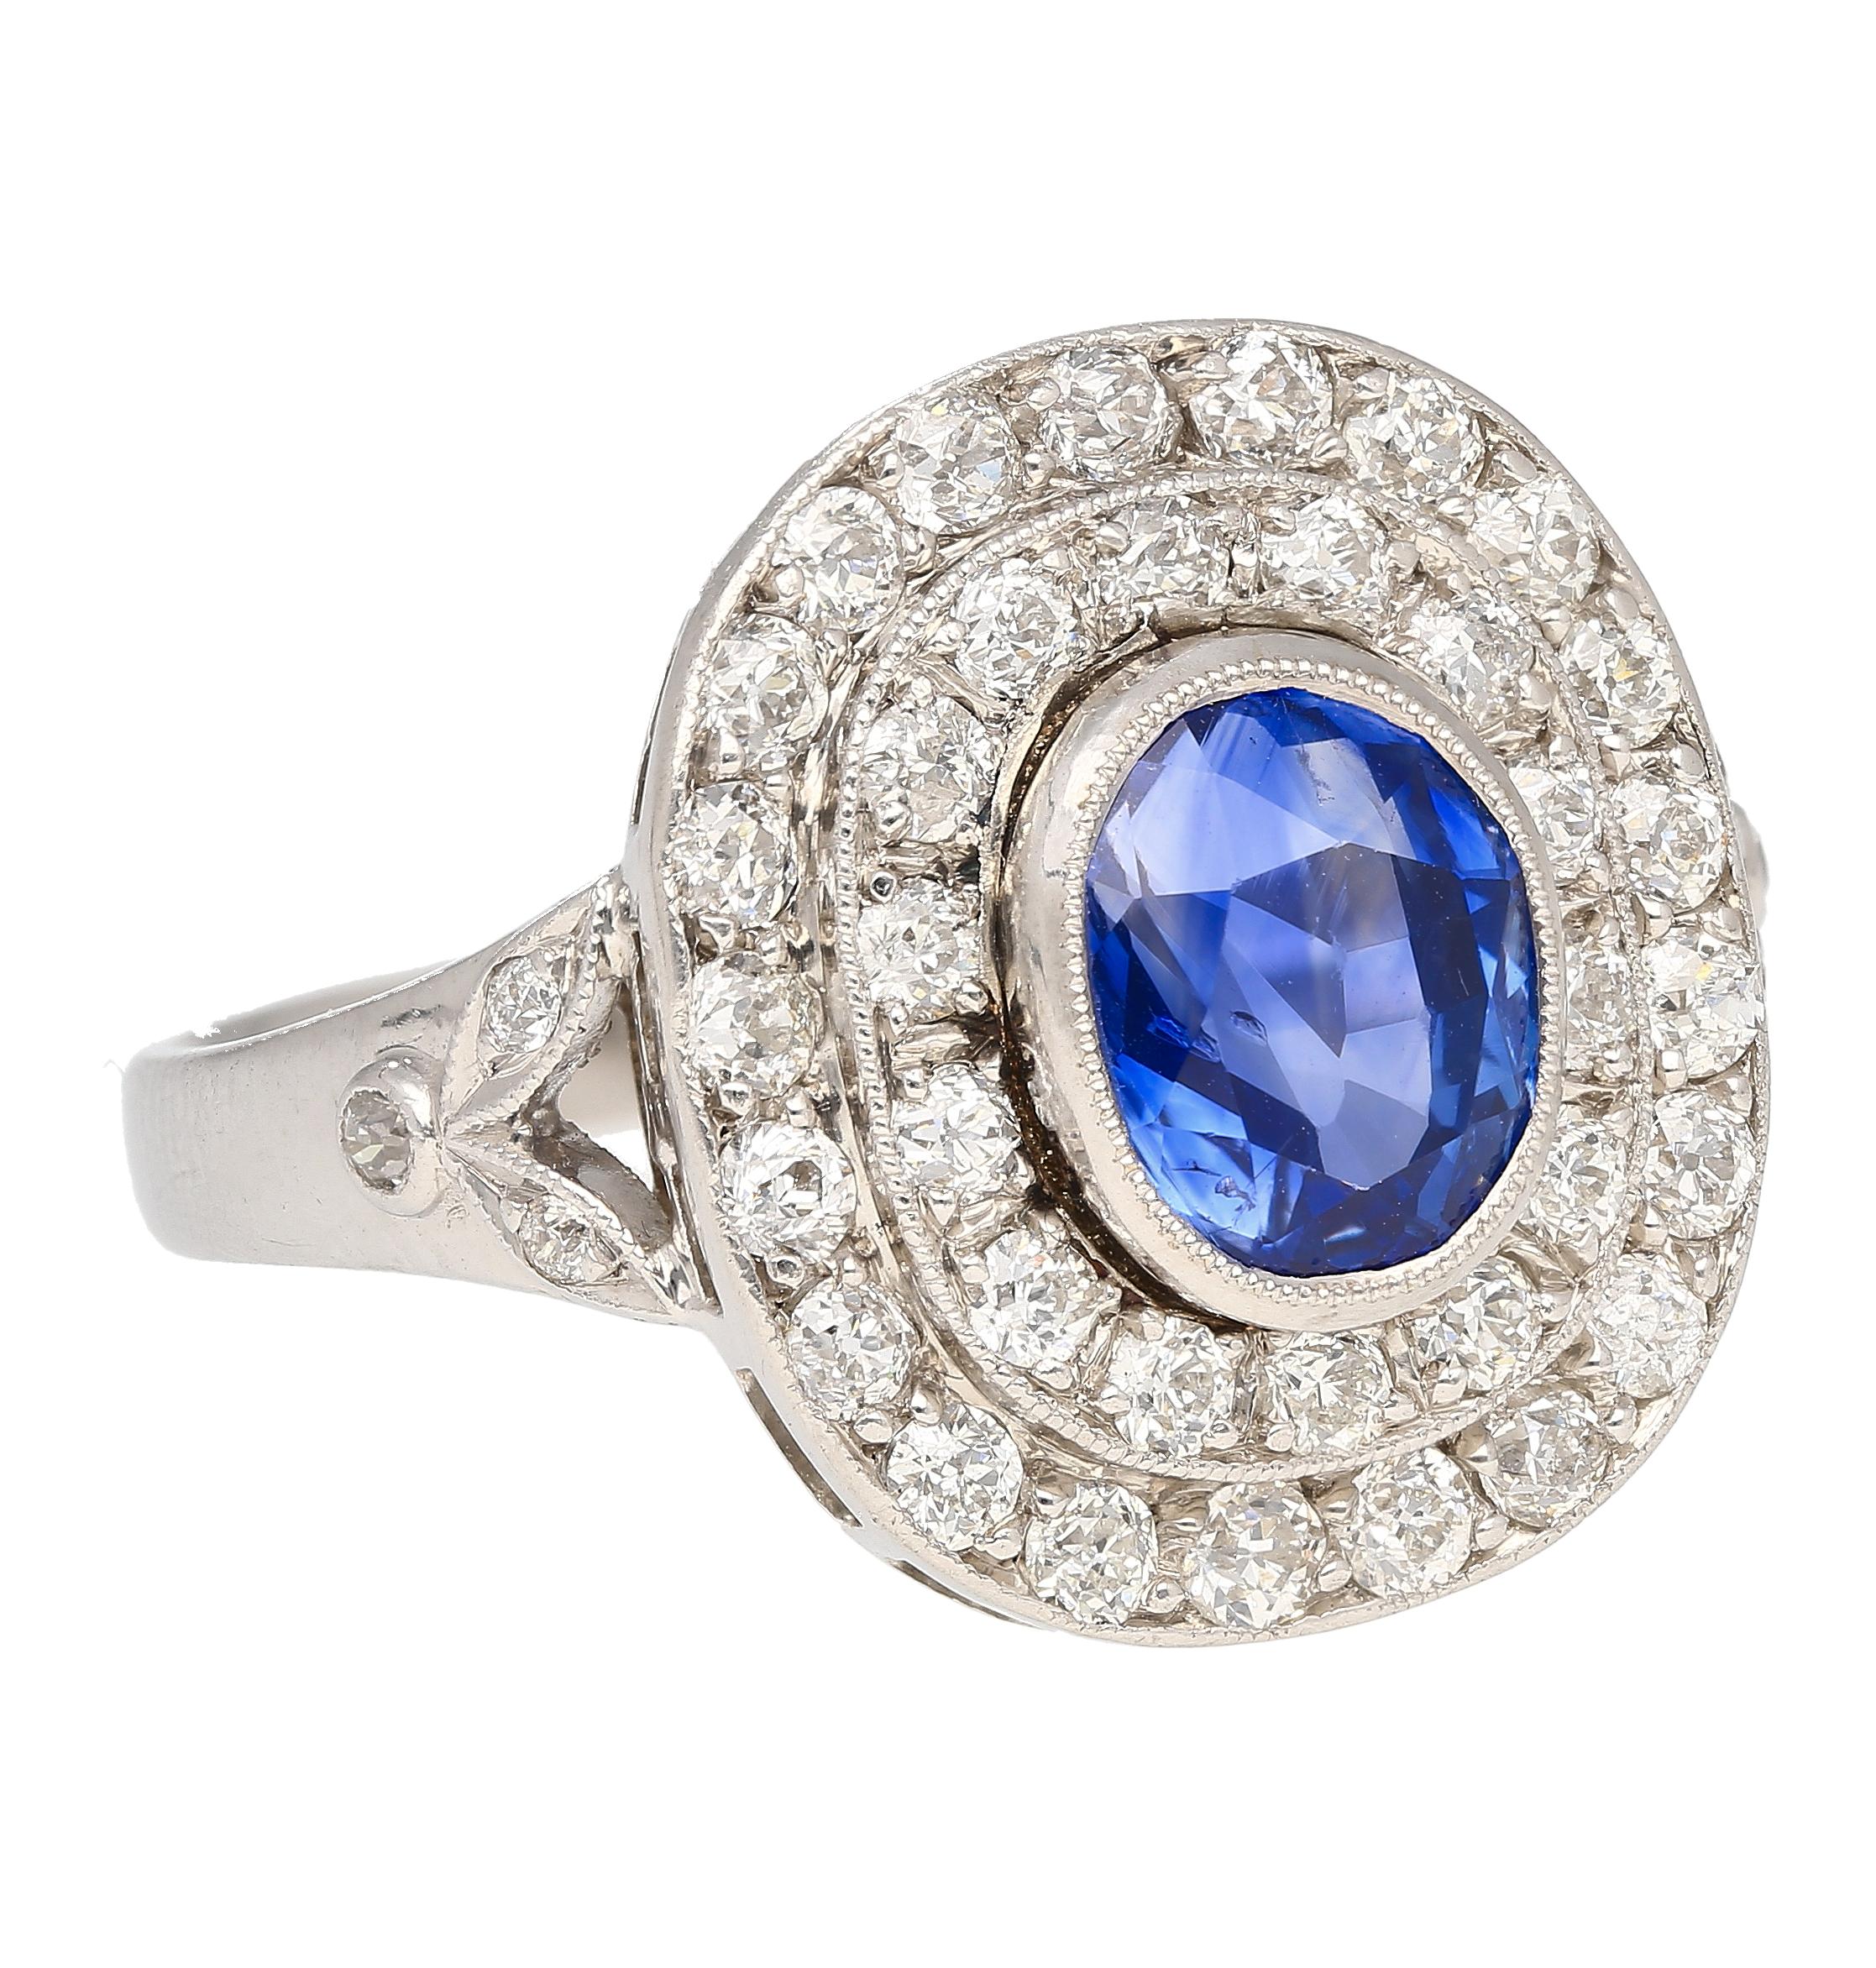 GRS certified no heat 2.56 carat Kashmir Blue Sapphire with double diamond halo ring. Mounted in a vintage bezel set platinum setting. The Blue Sapphire is superbly clean, with a legendary origin and no heat treatment of any kind. A true gem worthy